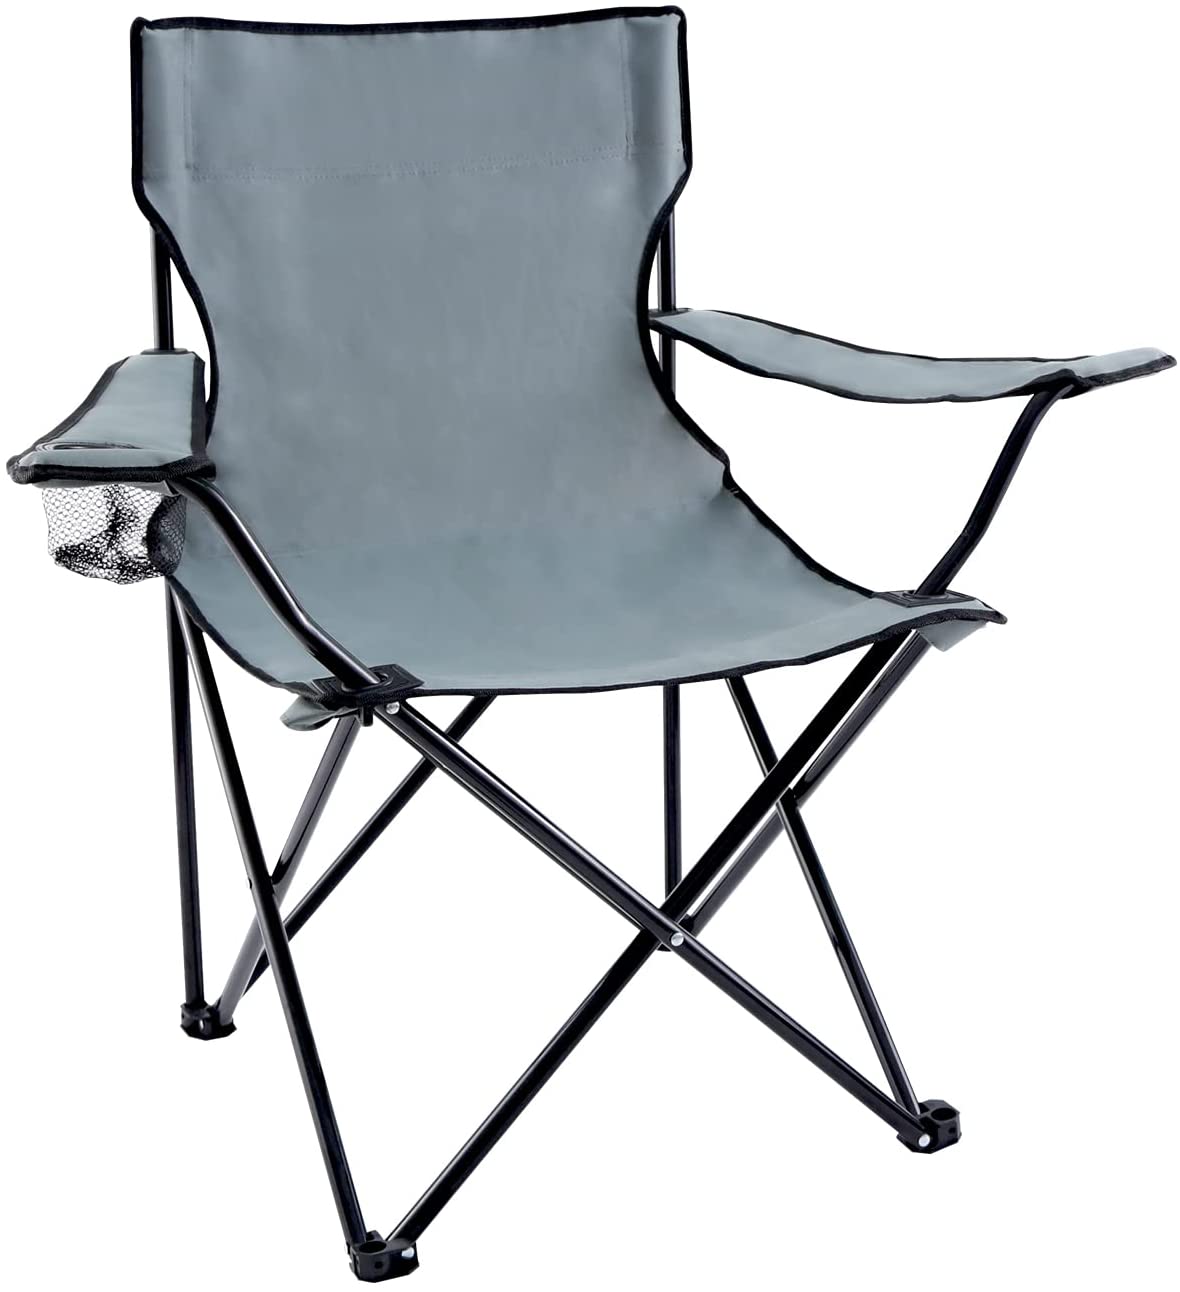 Portable Folding Grey Camping Chair, Large